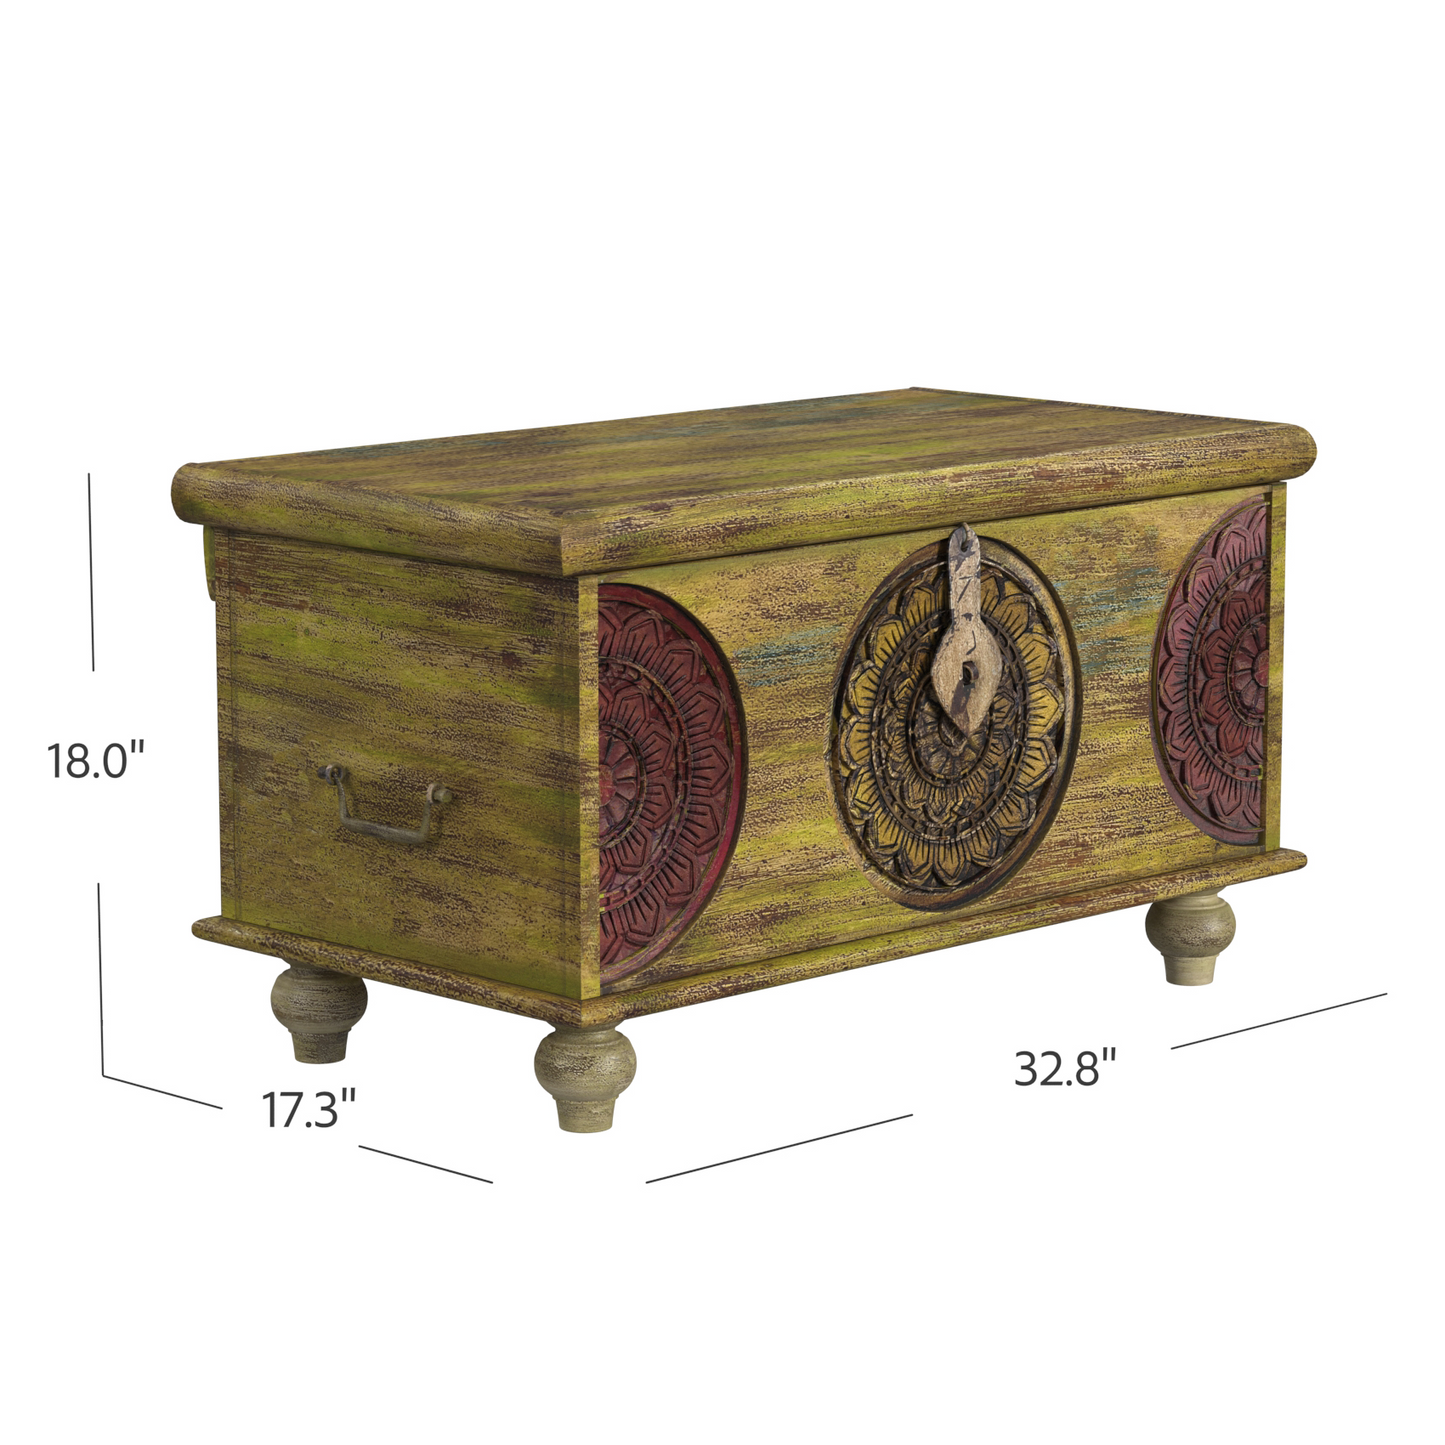 "Mesa Carved Wooden Trunk Coffee Table"